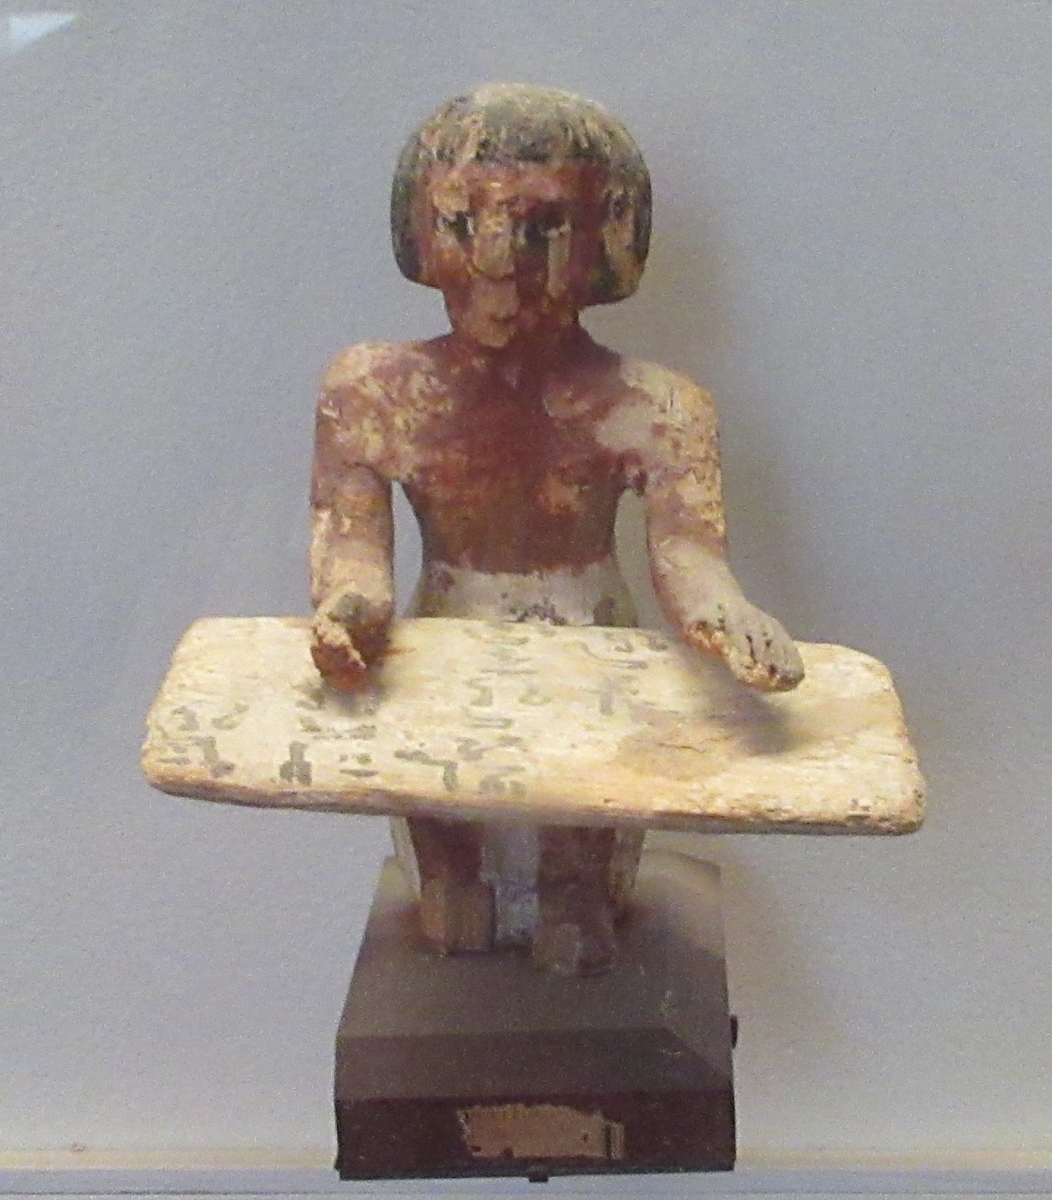 Sculpture of a scribe working with scribal tools.